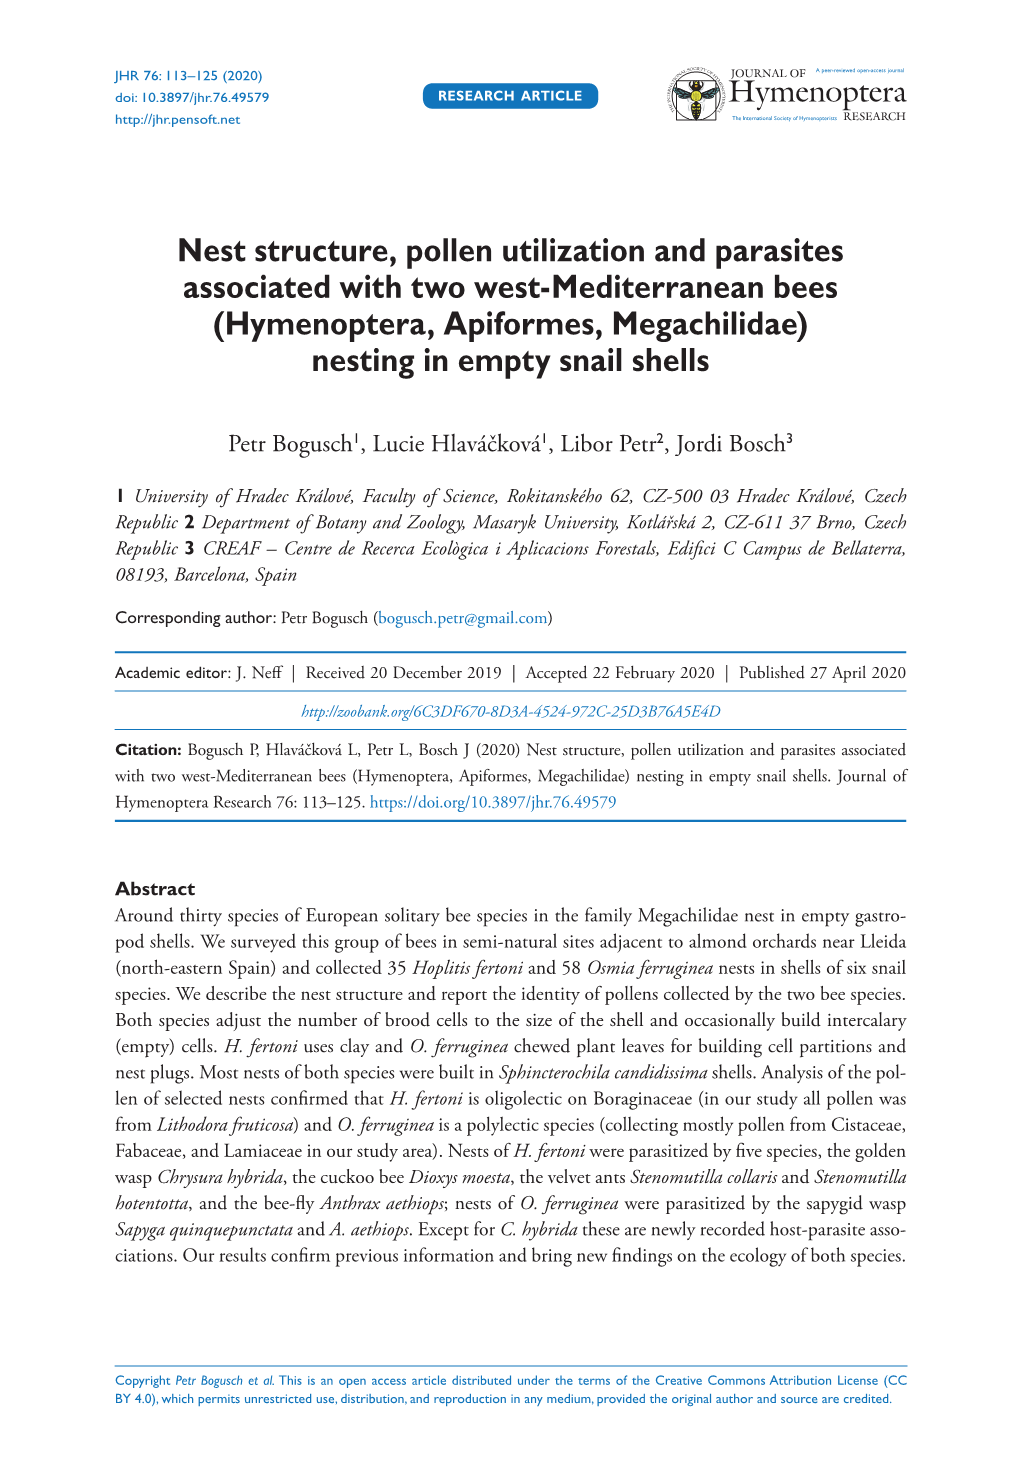 Nest Structure, Pollen Utilization and Parasites Associated with Two West-Mediterranean Bees (Hymenoptera, Apiformes, Megachilidae) Nesting in Empty Snail Shells